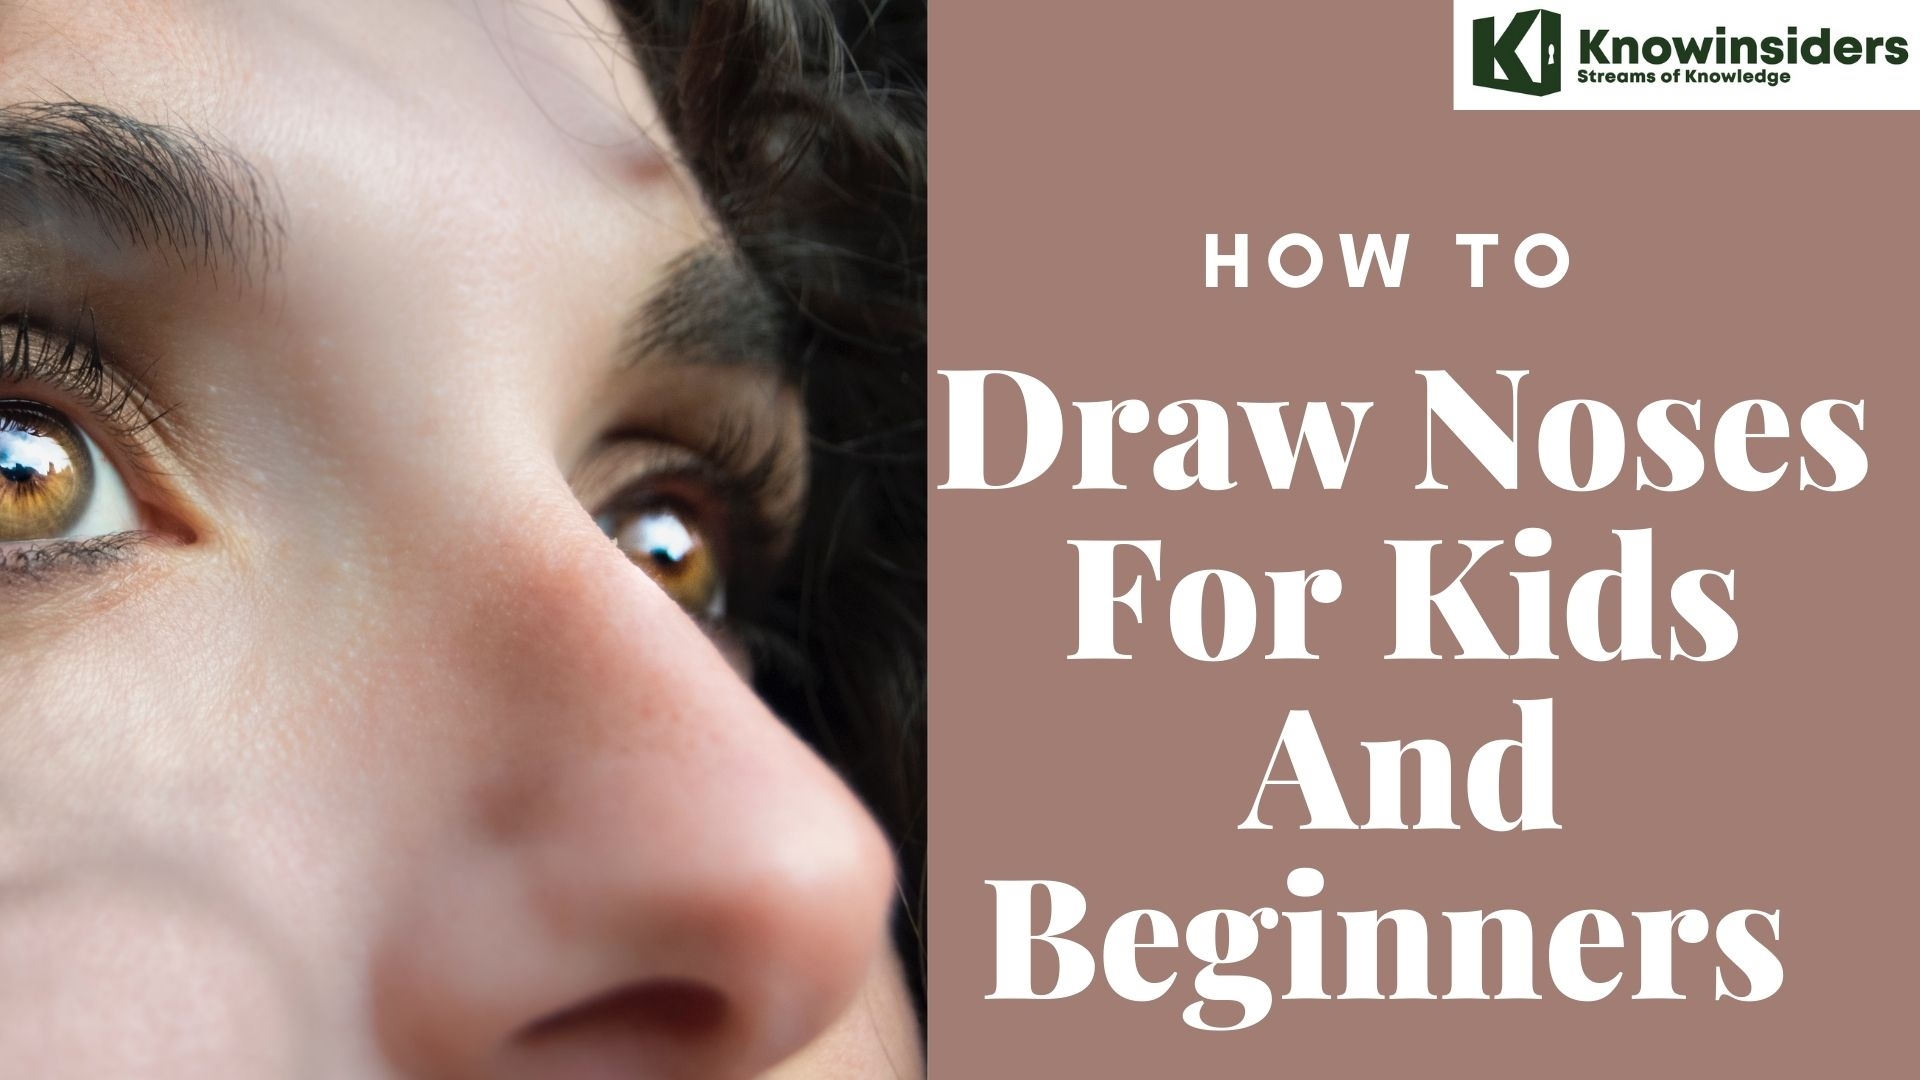 How To Draw A Nose For Kids And Beginners With Simple Steps